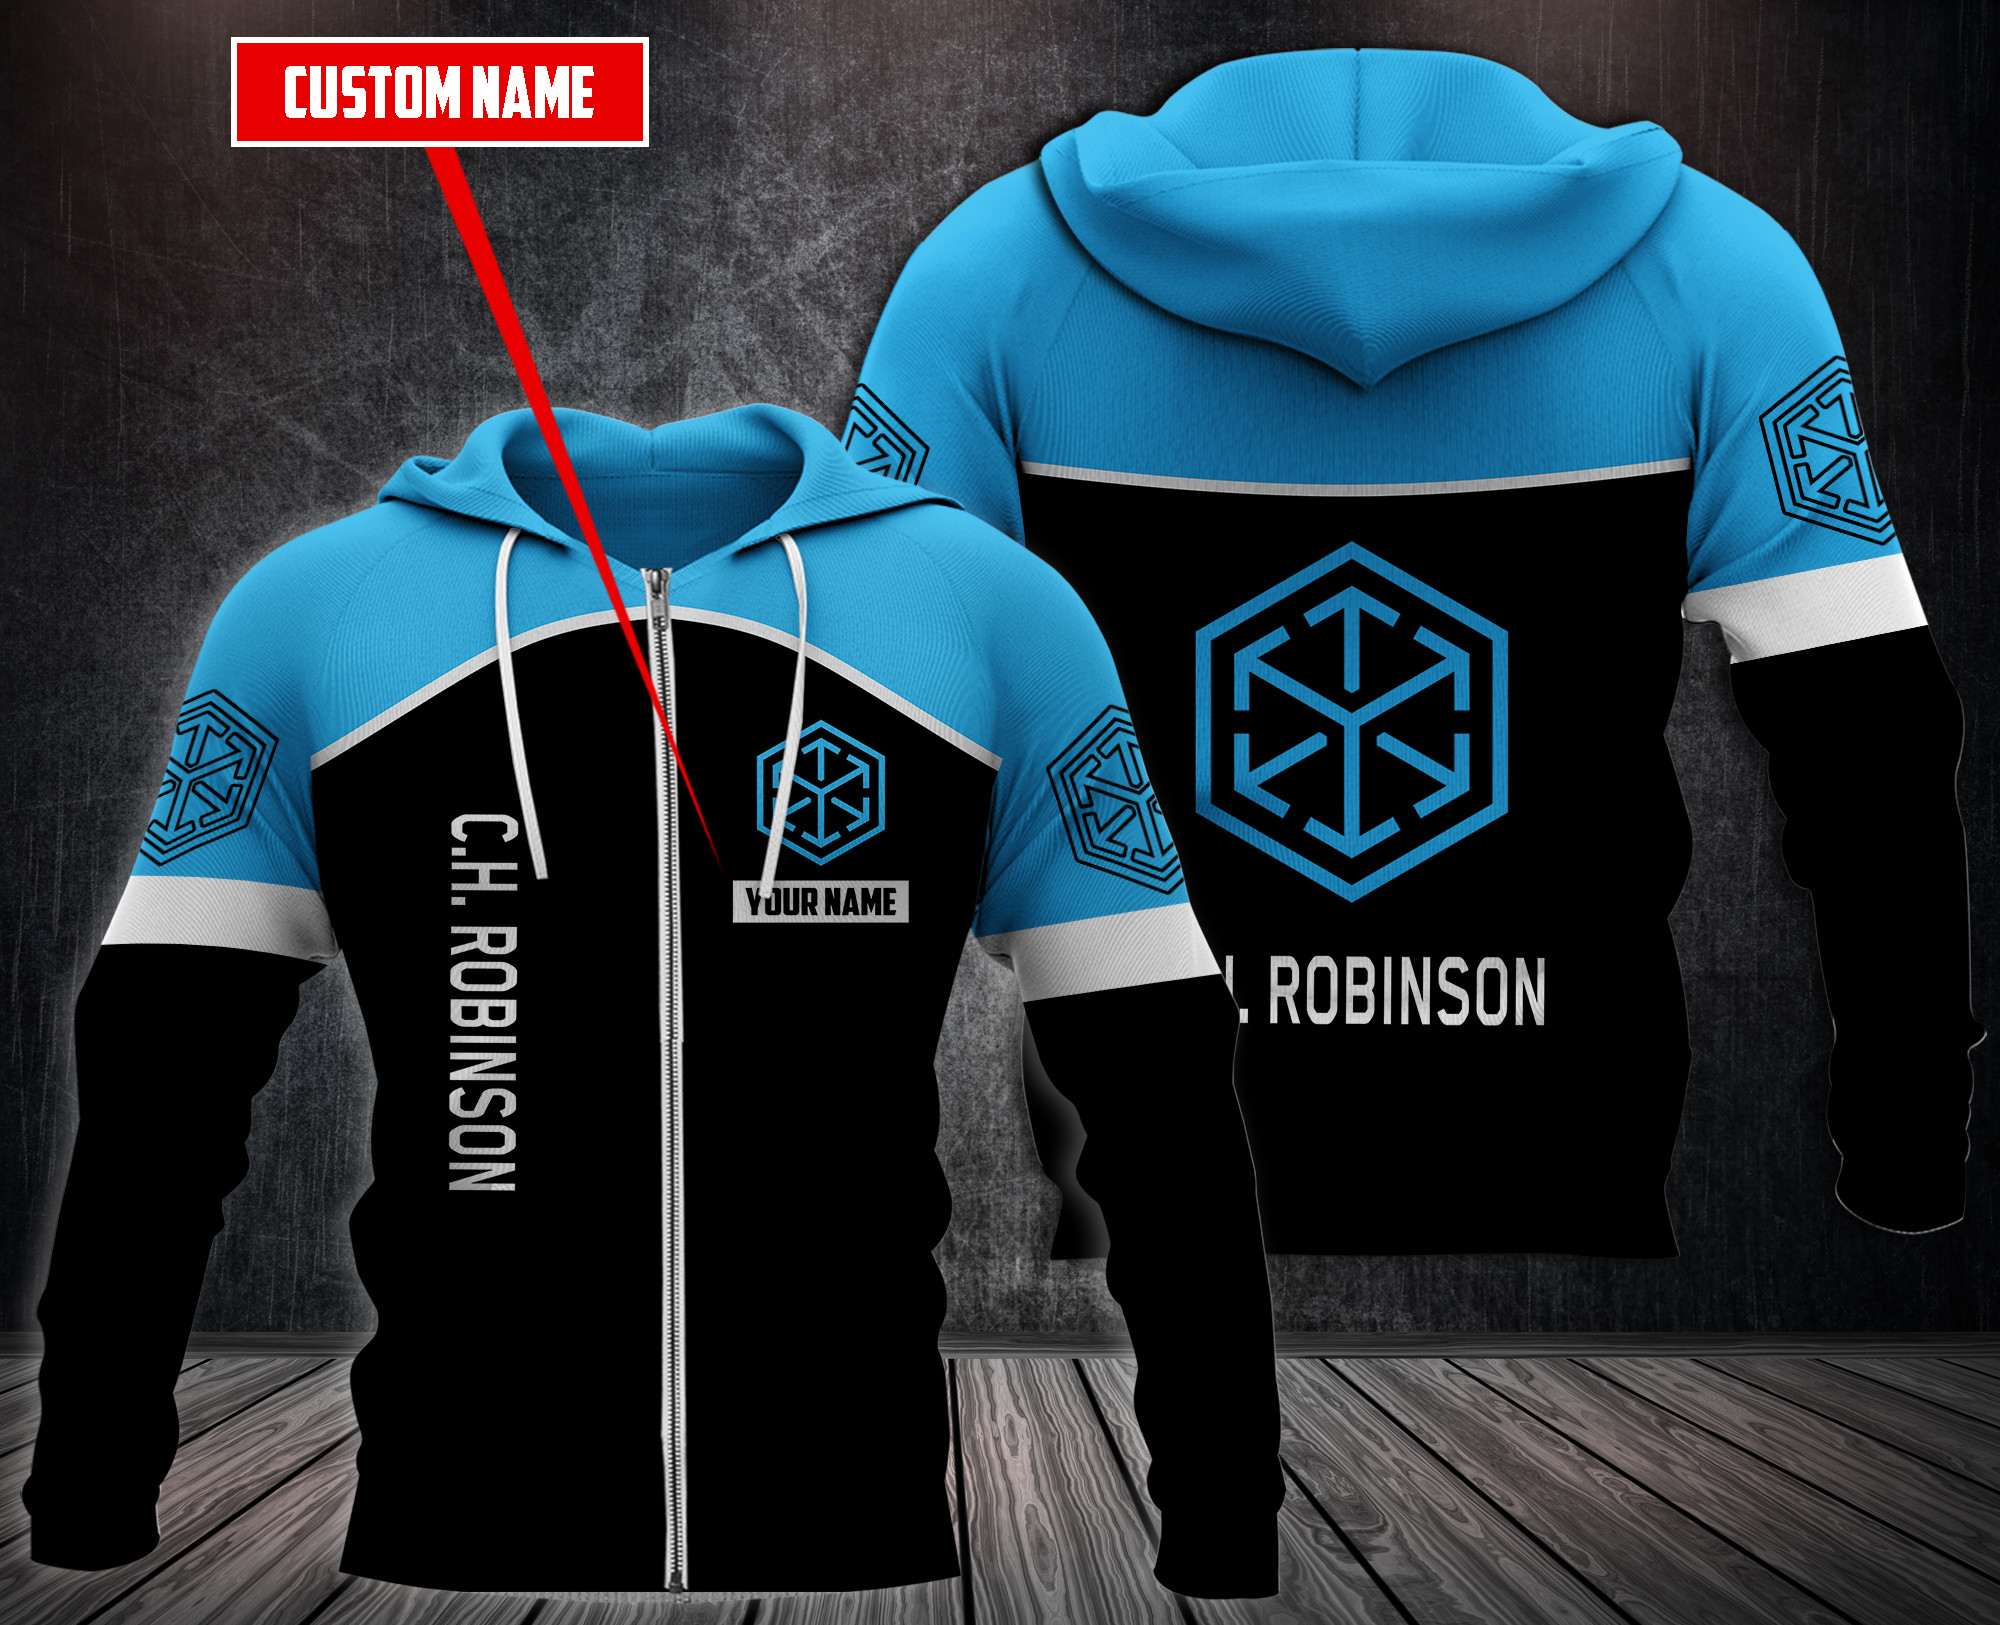 Choose the right hoodies for you on our boxboxshirt and ethershirt websites in 2022 40